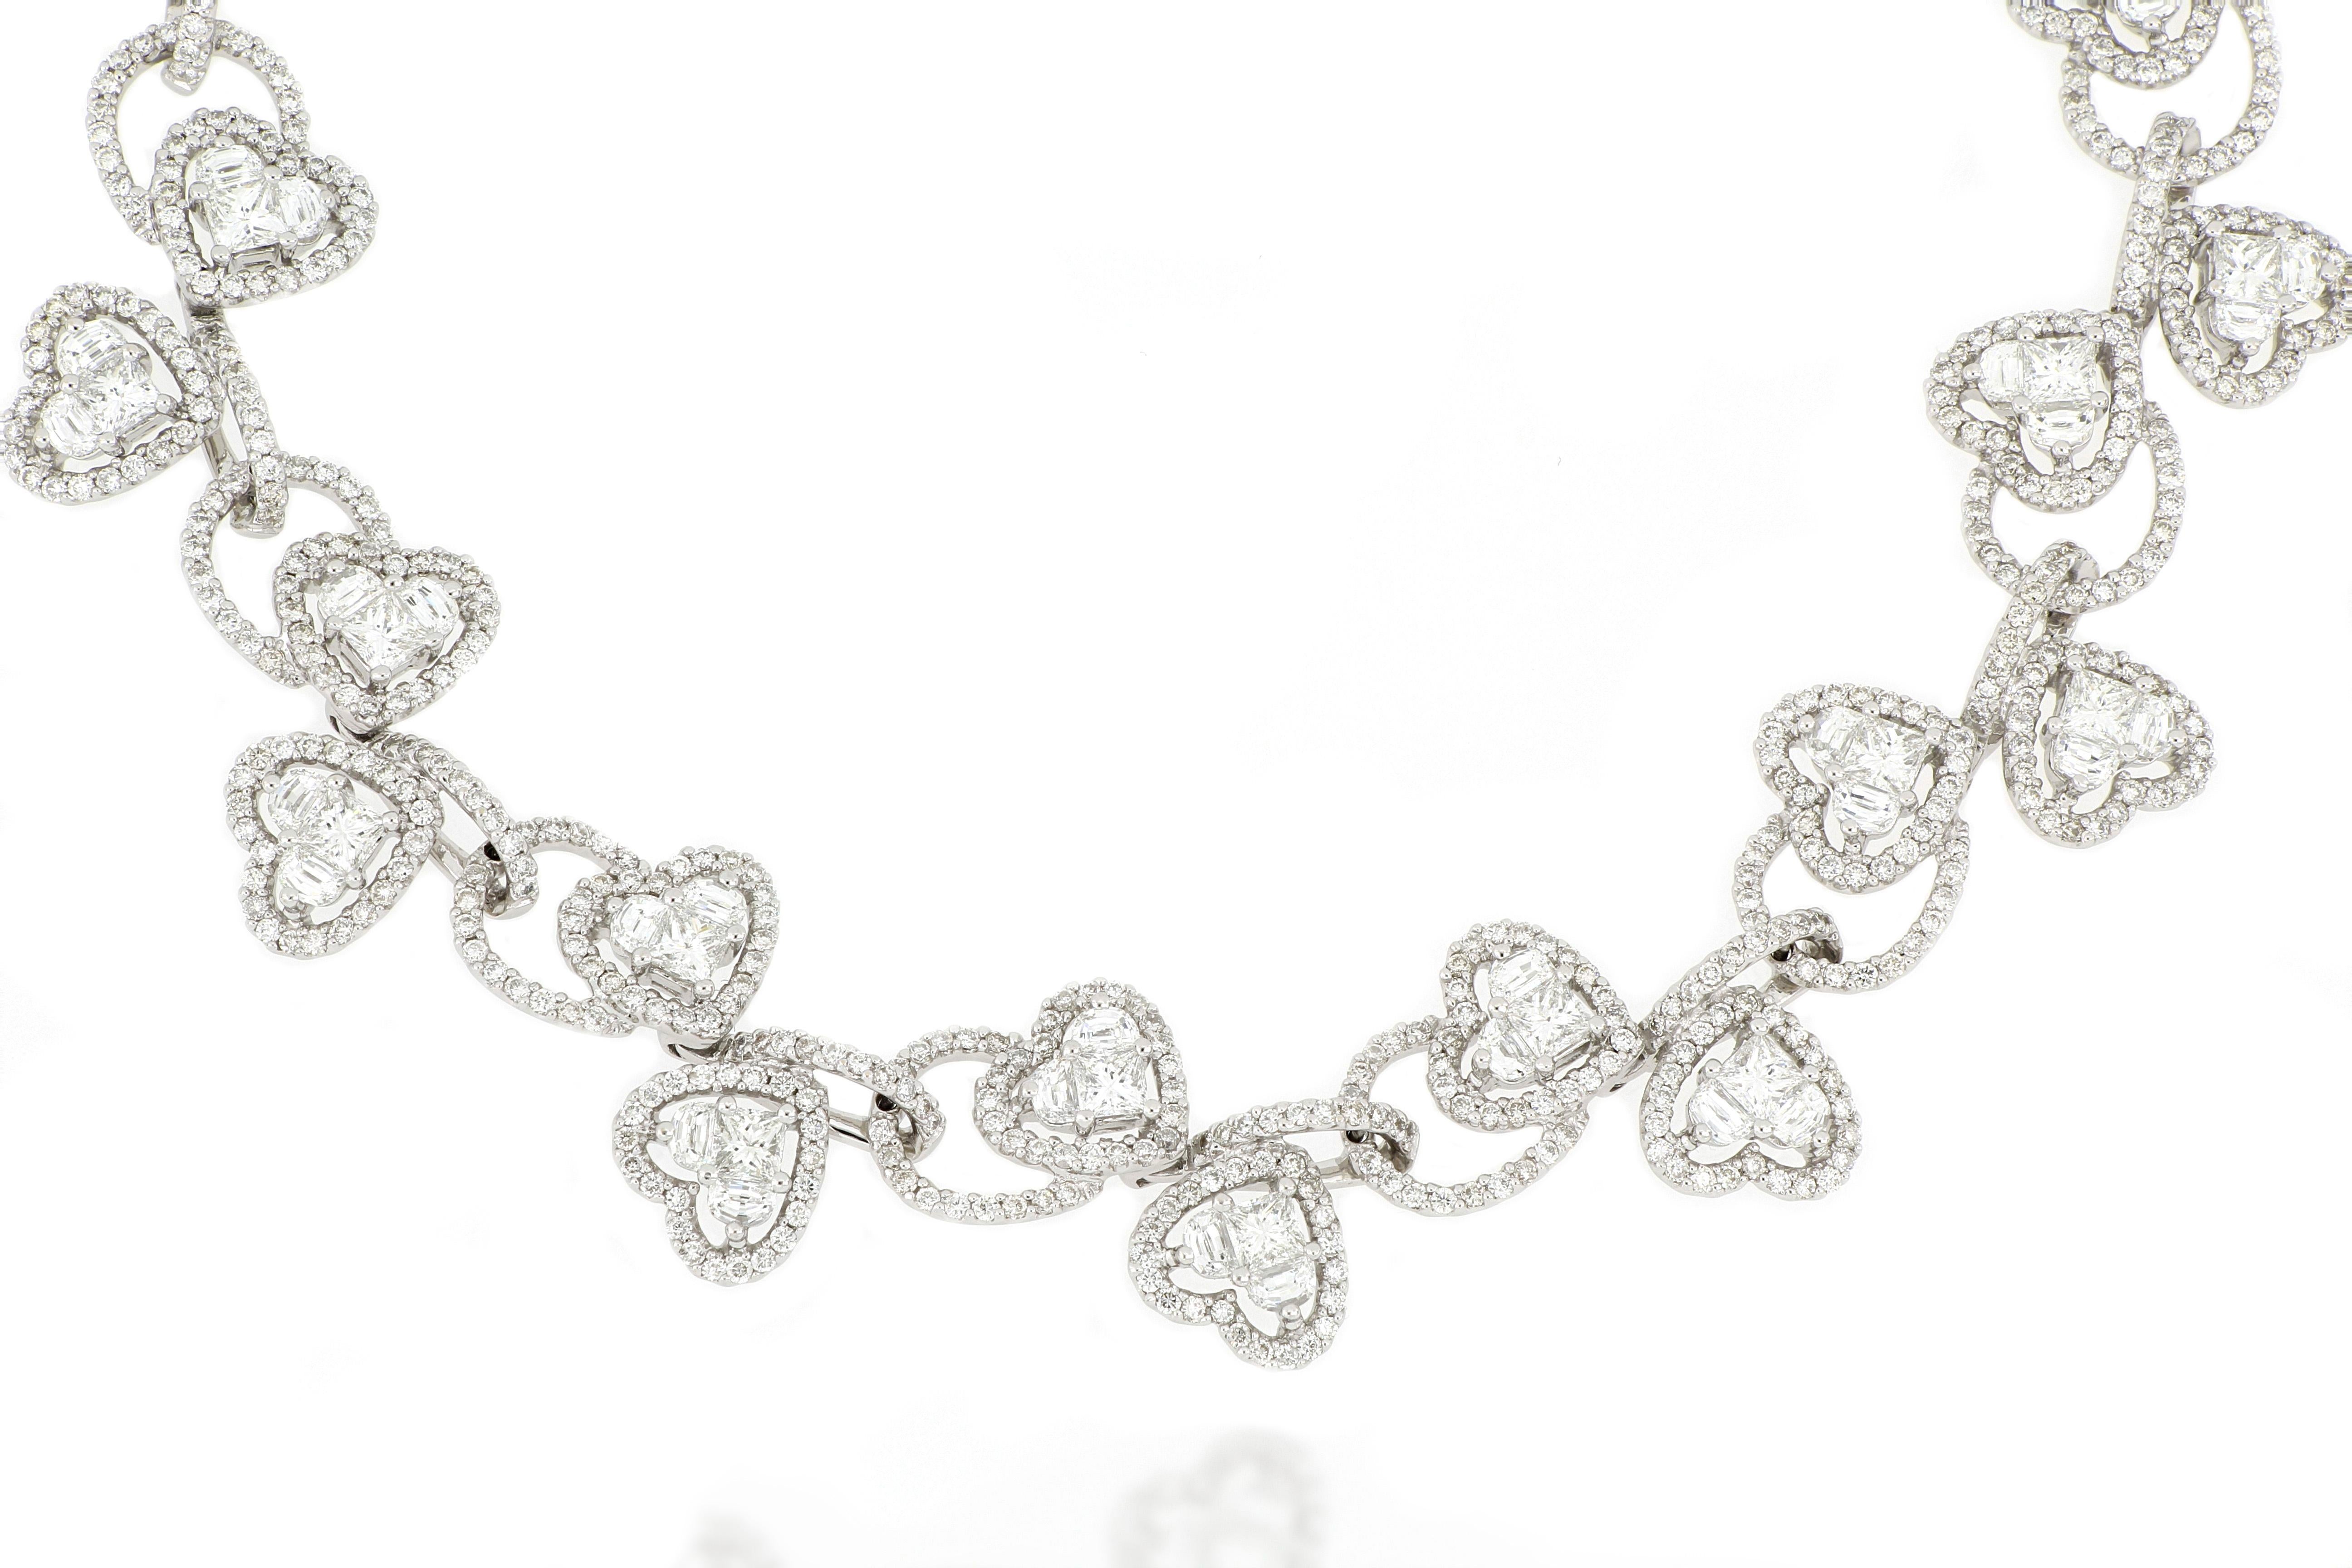 This fabulous diamond necklace is nicely designed with a structure composed of many heart shape pieces interlocked together. The entire necklace  is set with one thousand five hundred pieces of diamonds, weighing 12.88 carats in total, mounted in 18